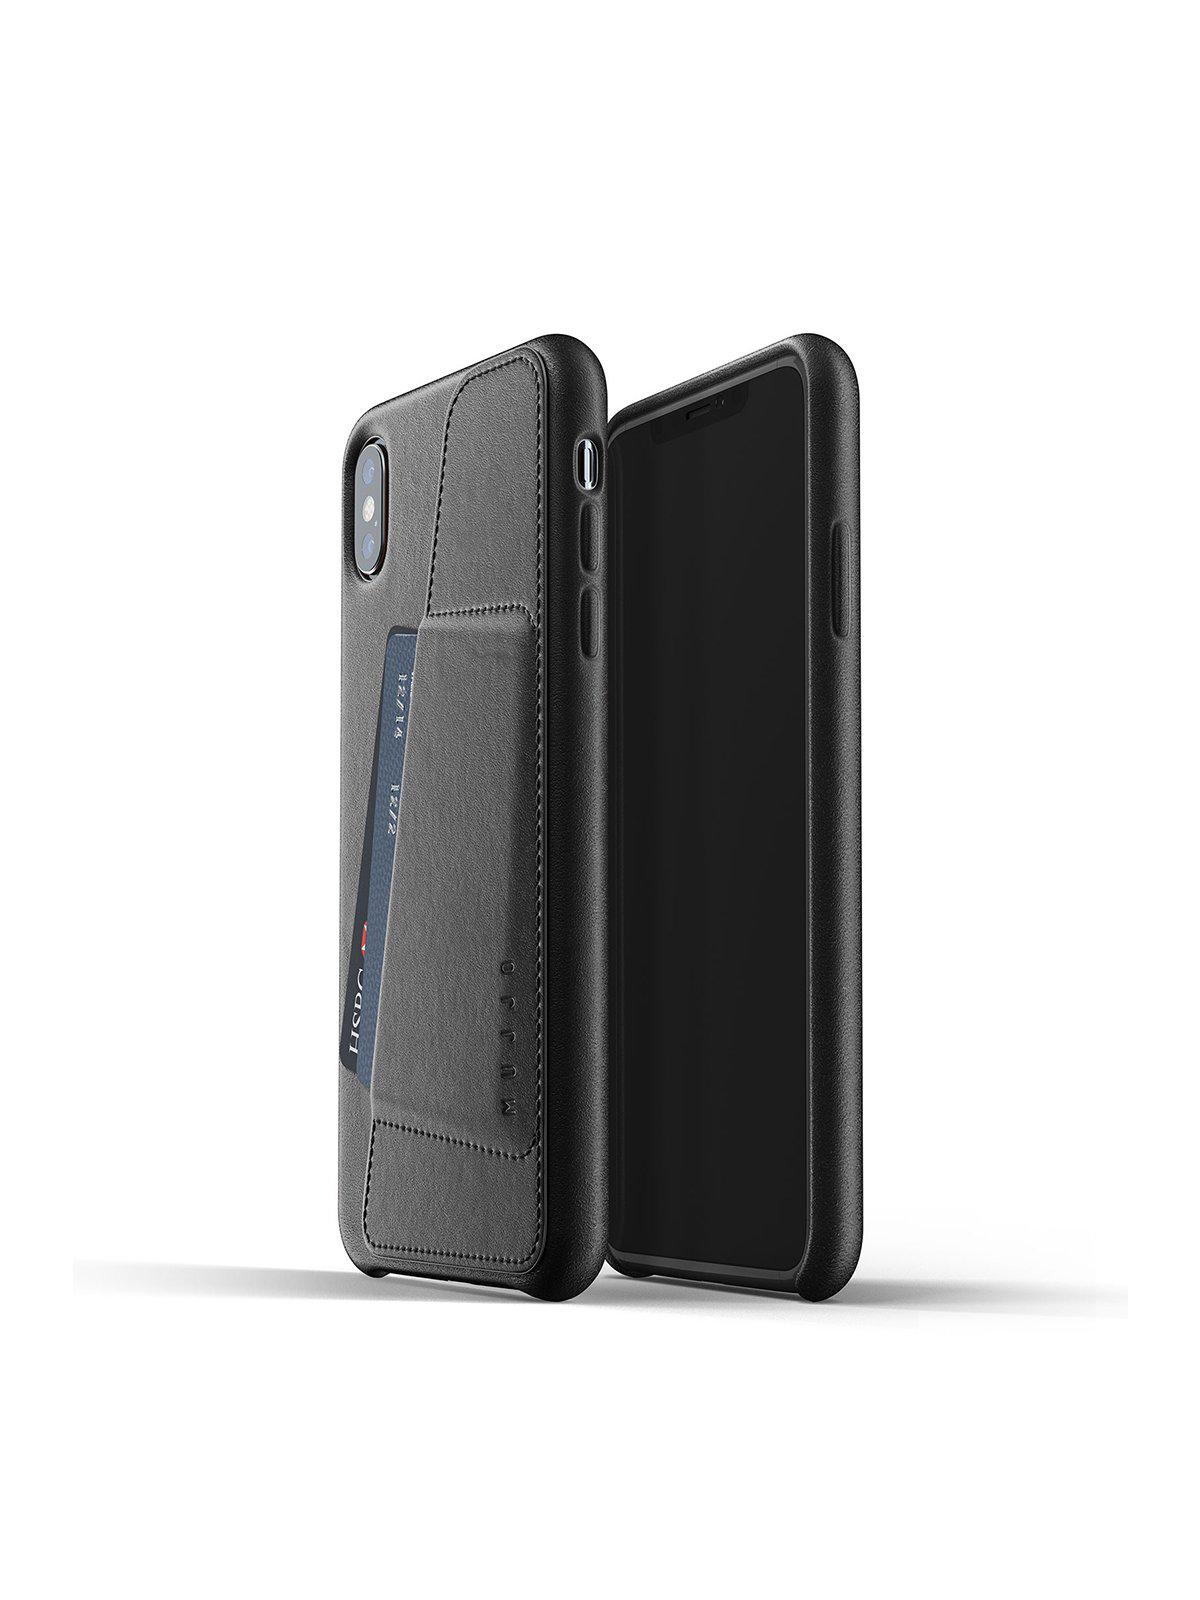 Mujjo Full Leather Wallet Case for iPhone XS Max Black - MORE by Morello Indonesia